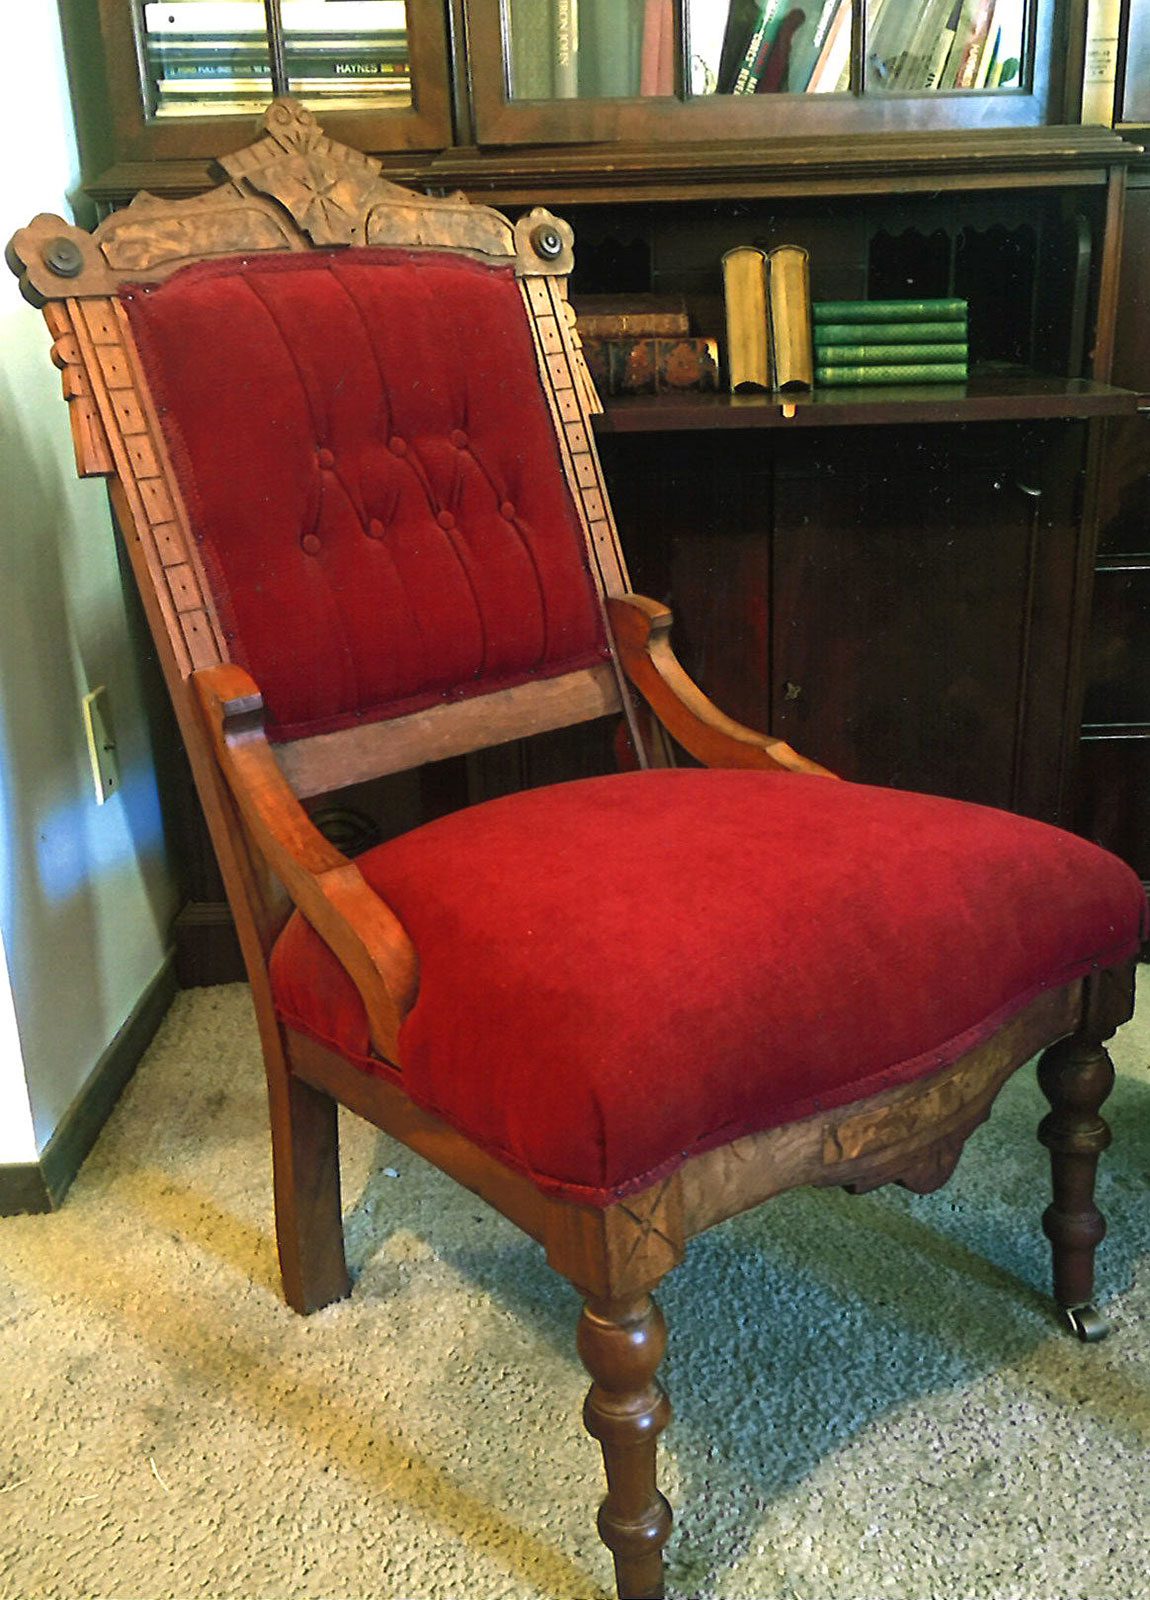 Fully restored red chair